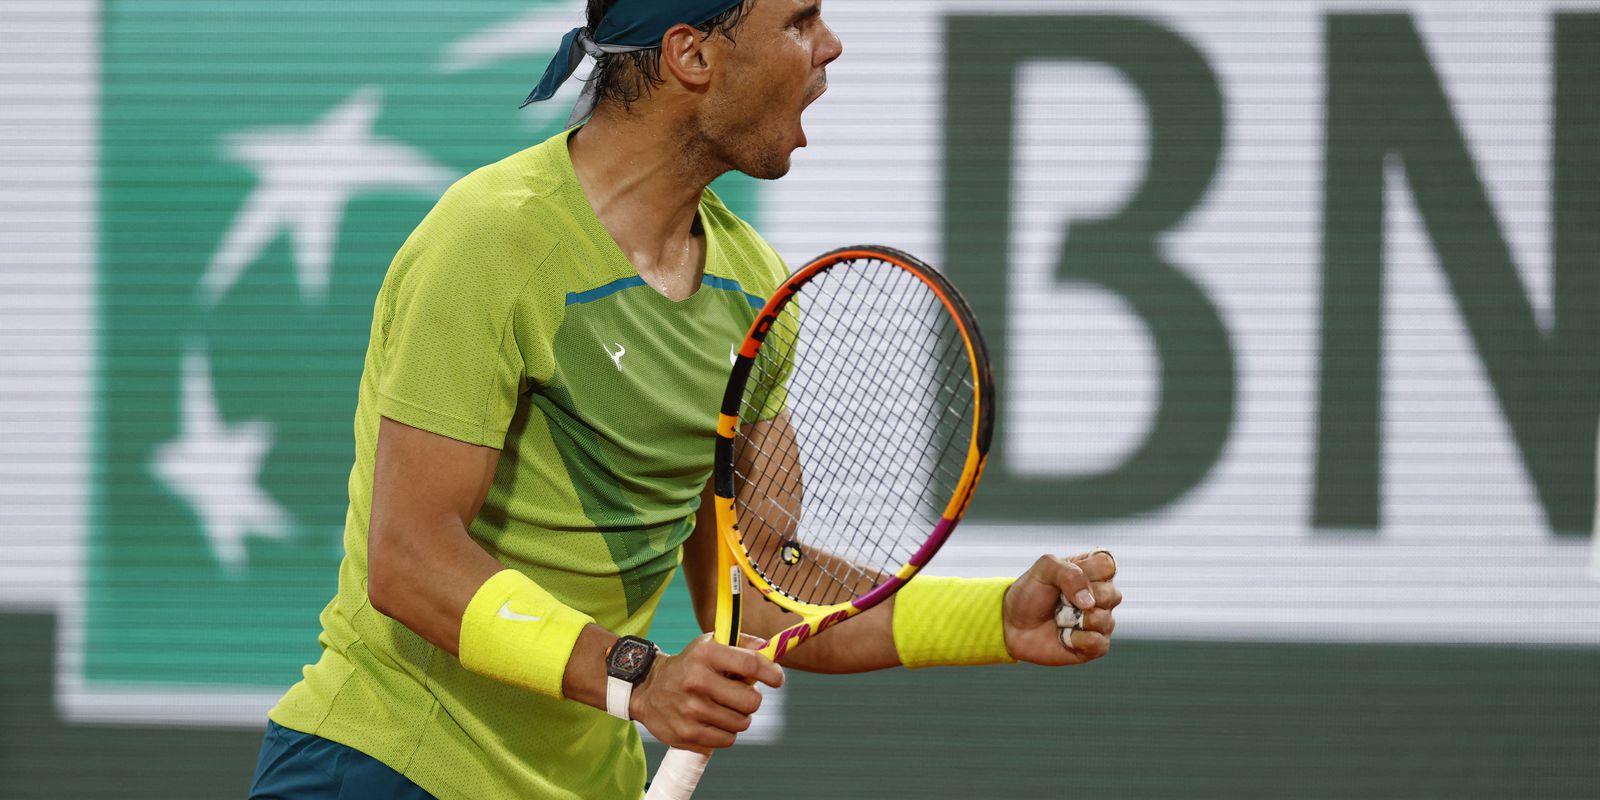 Rafael Nadal and Casper Ruud will make the final of the Roland Garros tournament